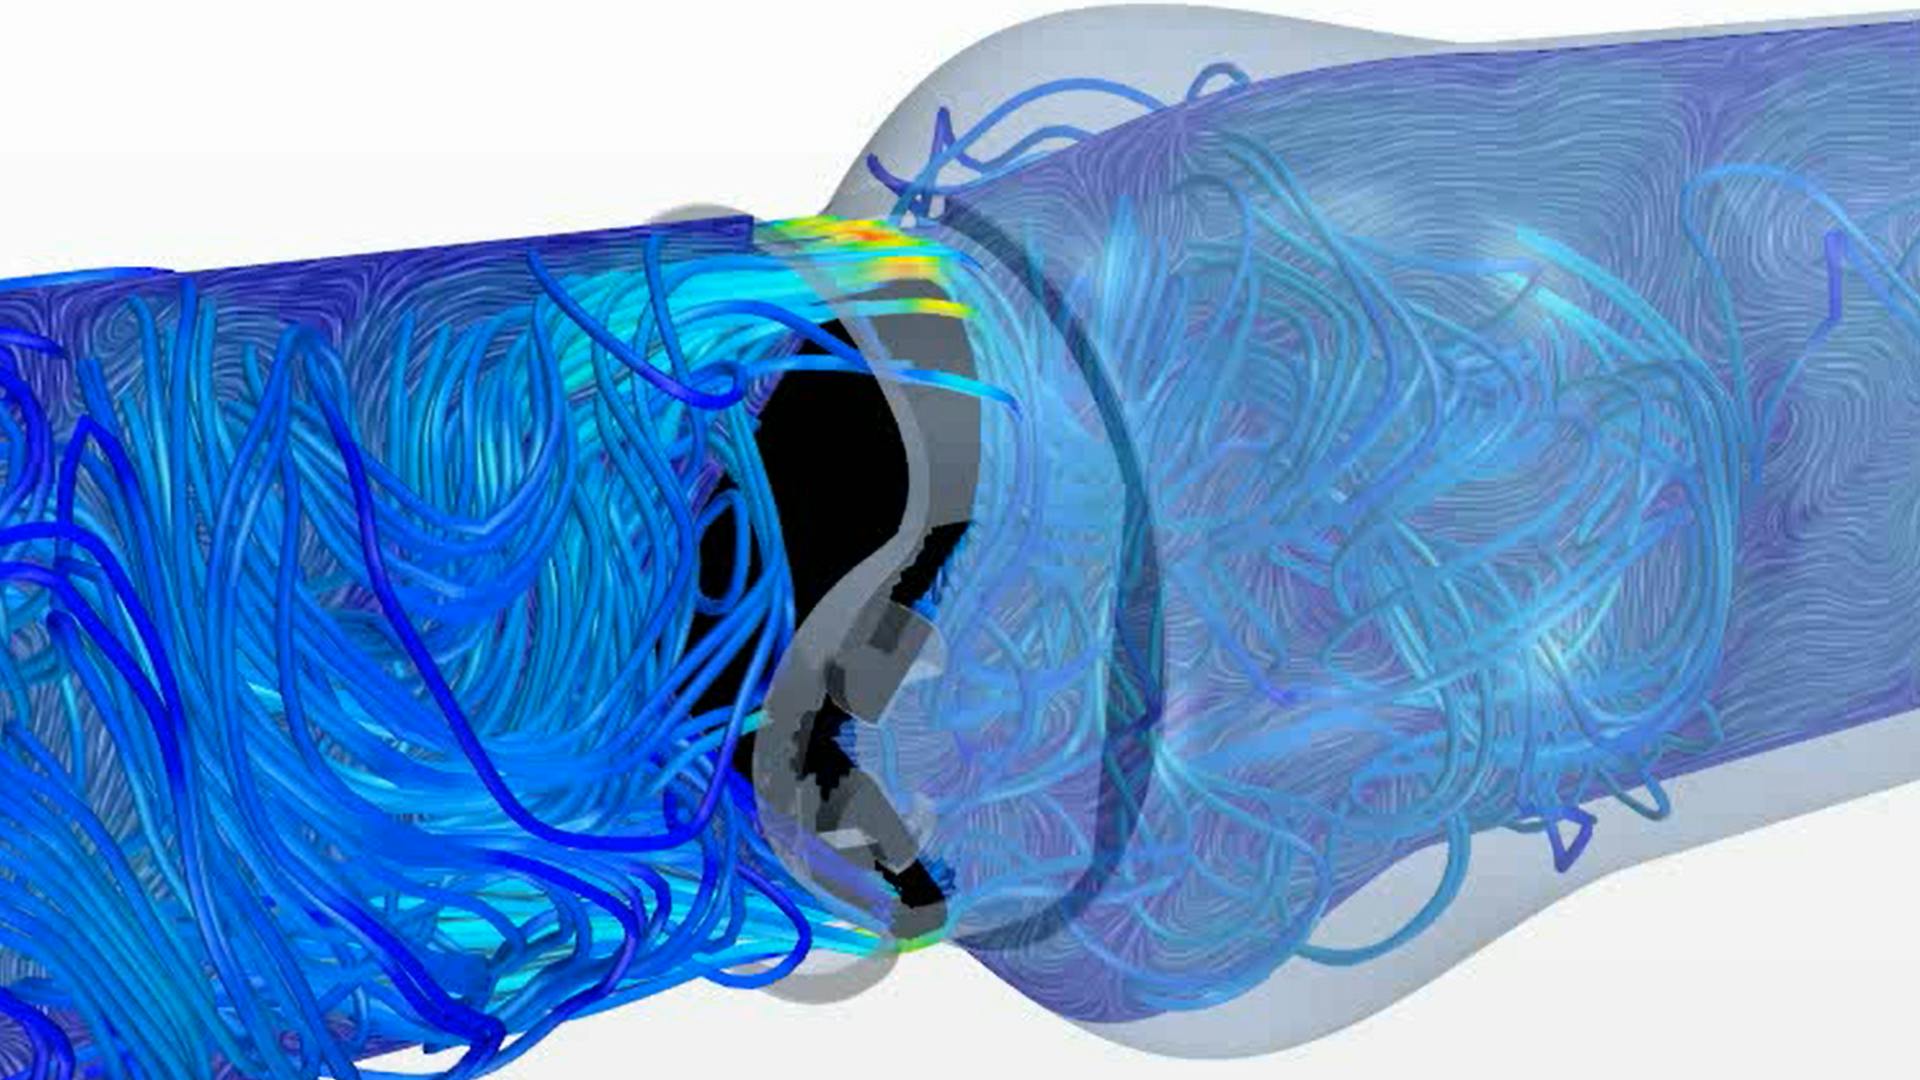 Revealing the details of blood flow through mechanical heart valves with CFD simulation